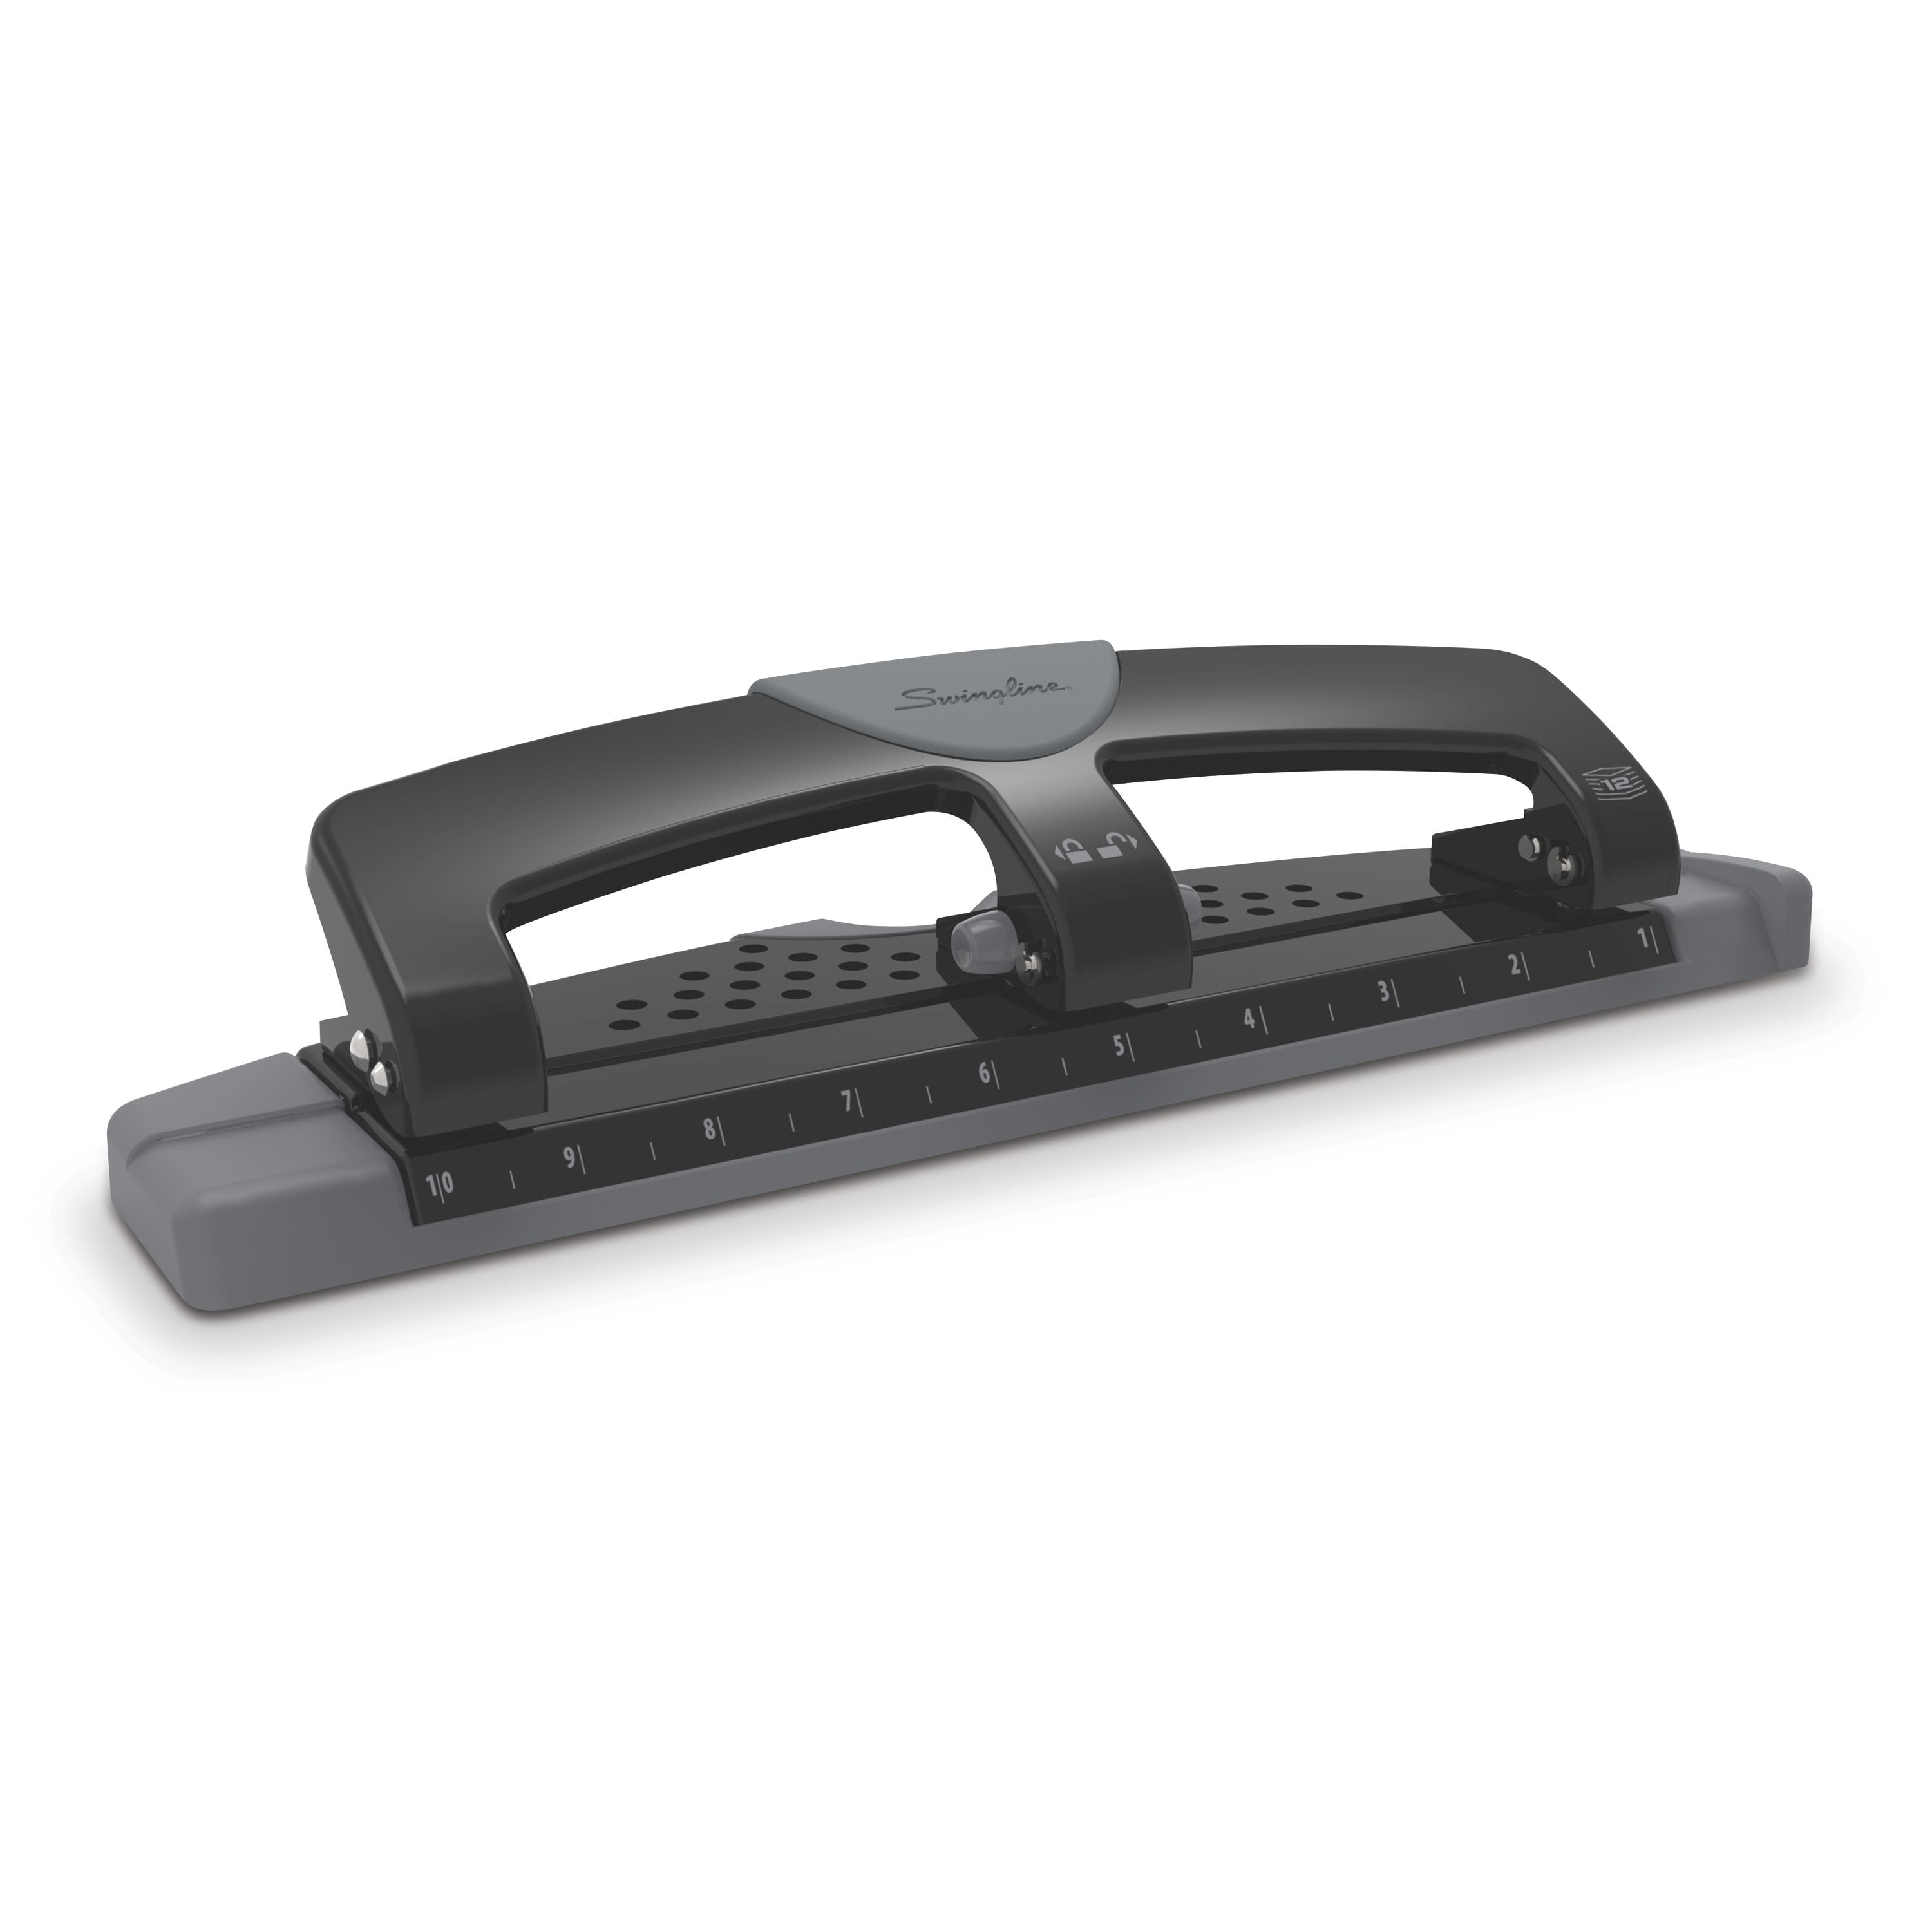 Swingline 74150 24-Sheet Easy Touch Three- to Seven-Hole Punch 0.28 in. Holes - Black